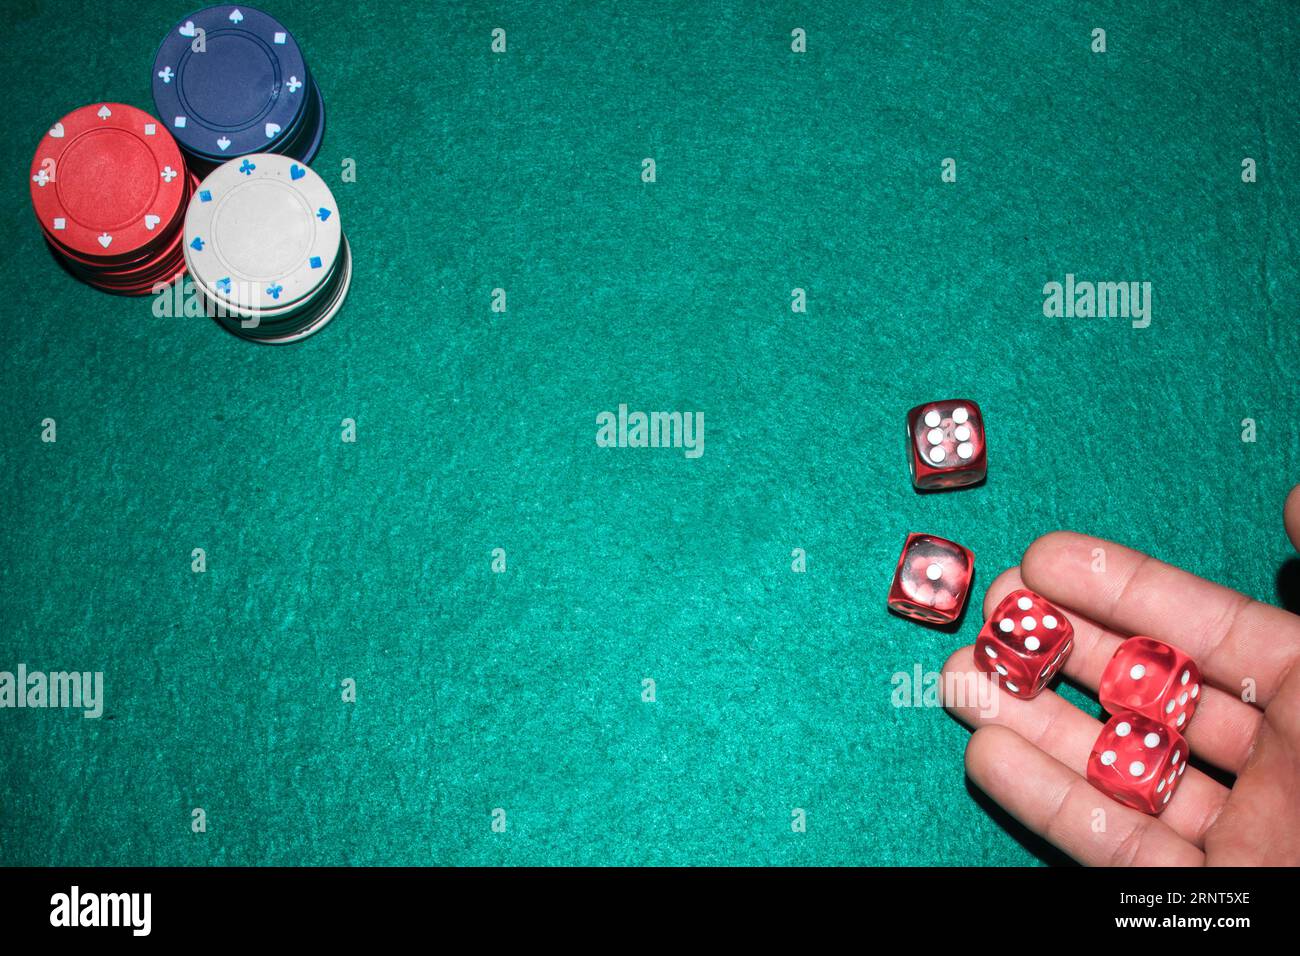 Poker player s hand throwing red dices poker table Stock Photo